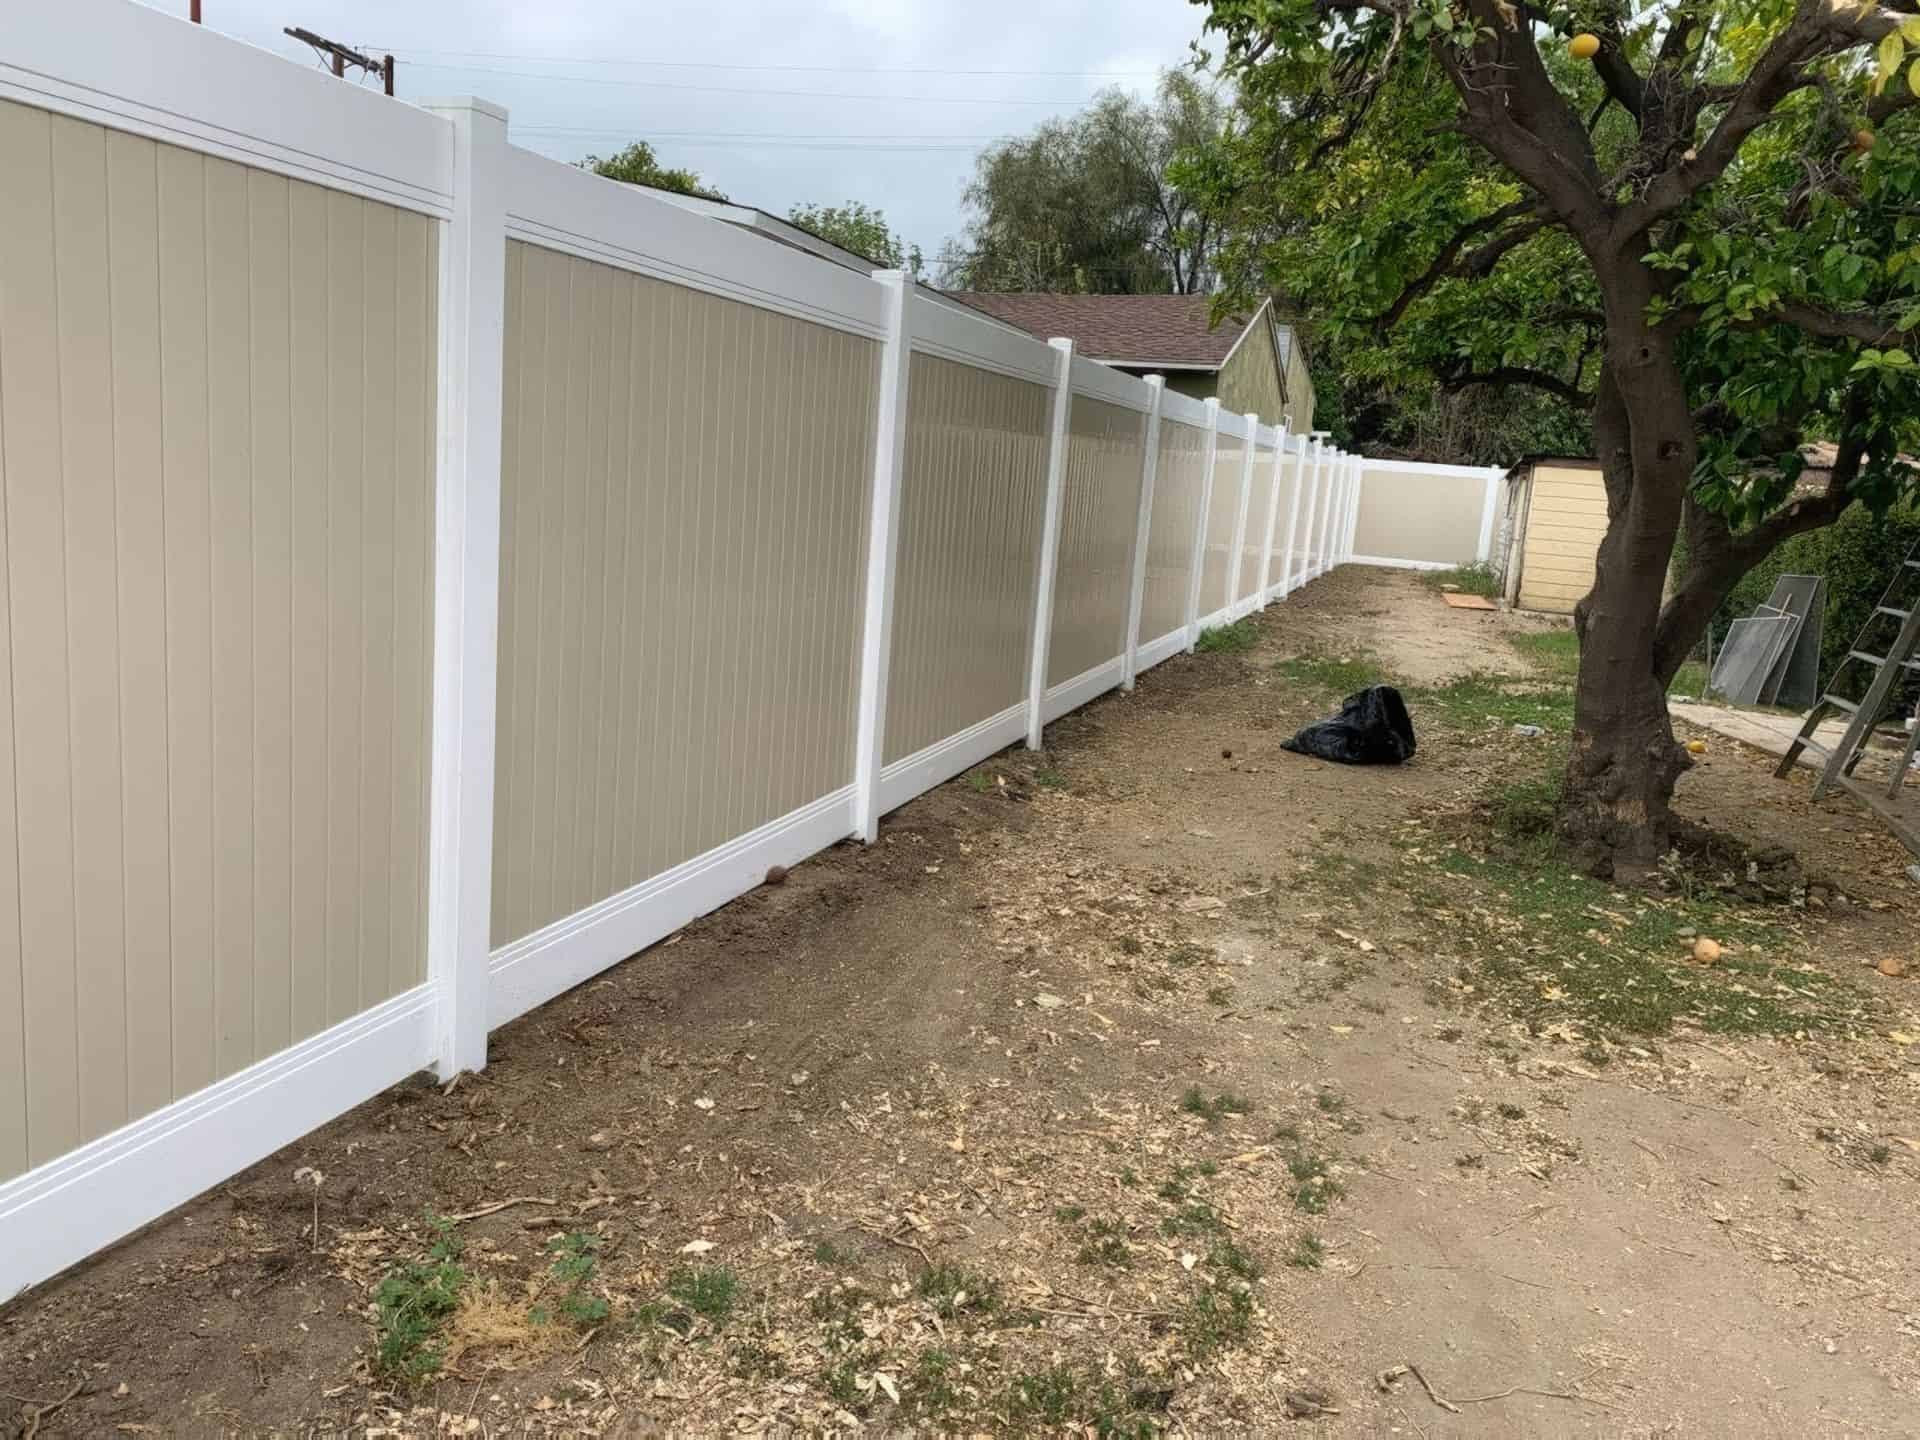 Vinyl privacy two-tone fence with beige center and white borders as a boundary around the backyard with a large tree.